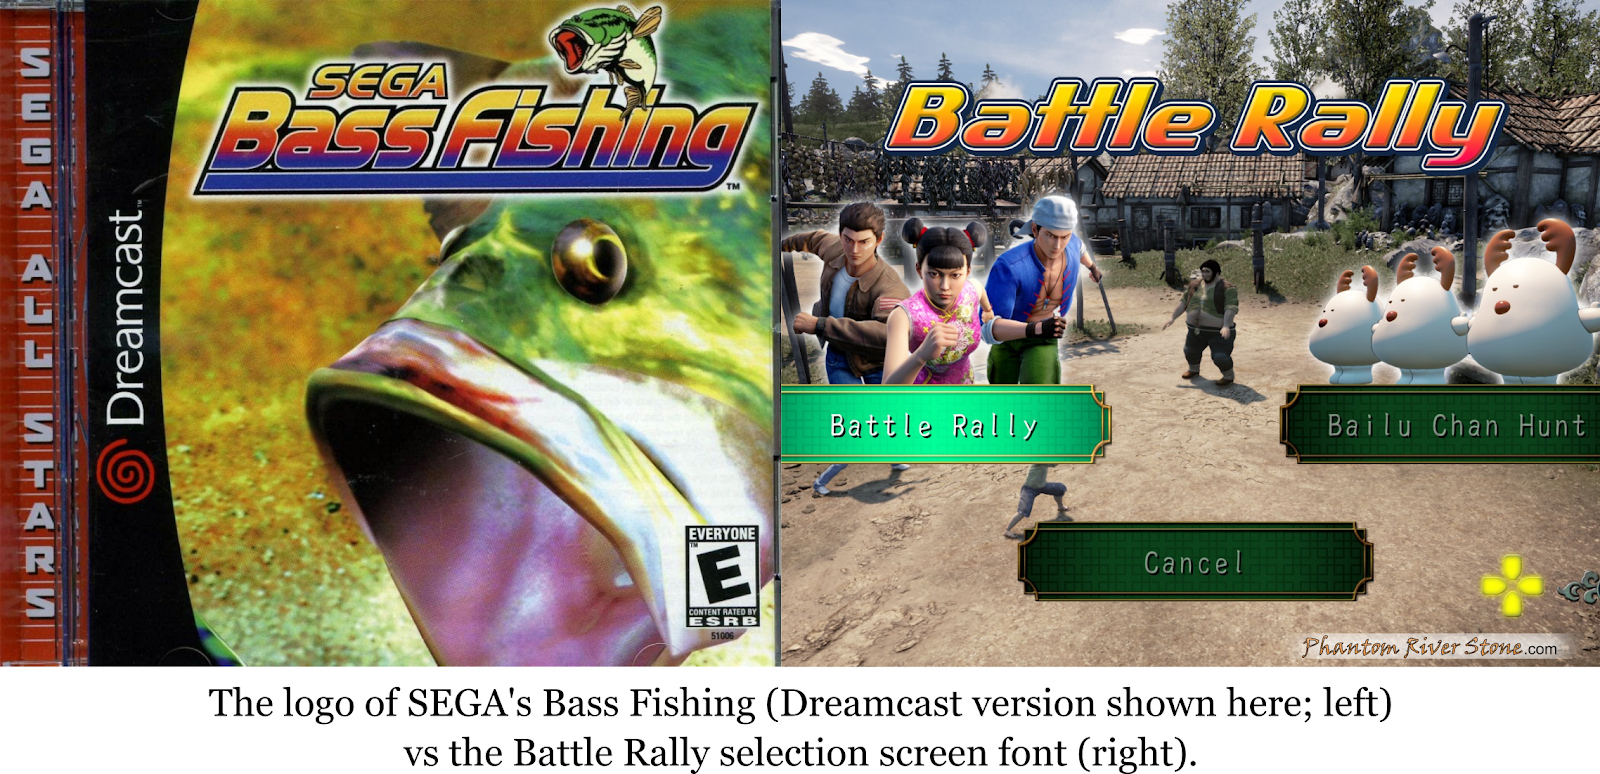 A Nod to Bass Fishing in the Battle Rally DLC